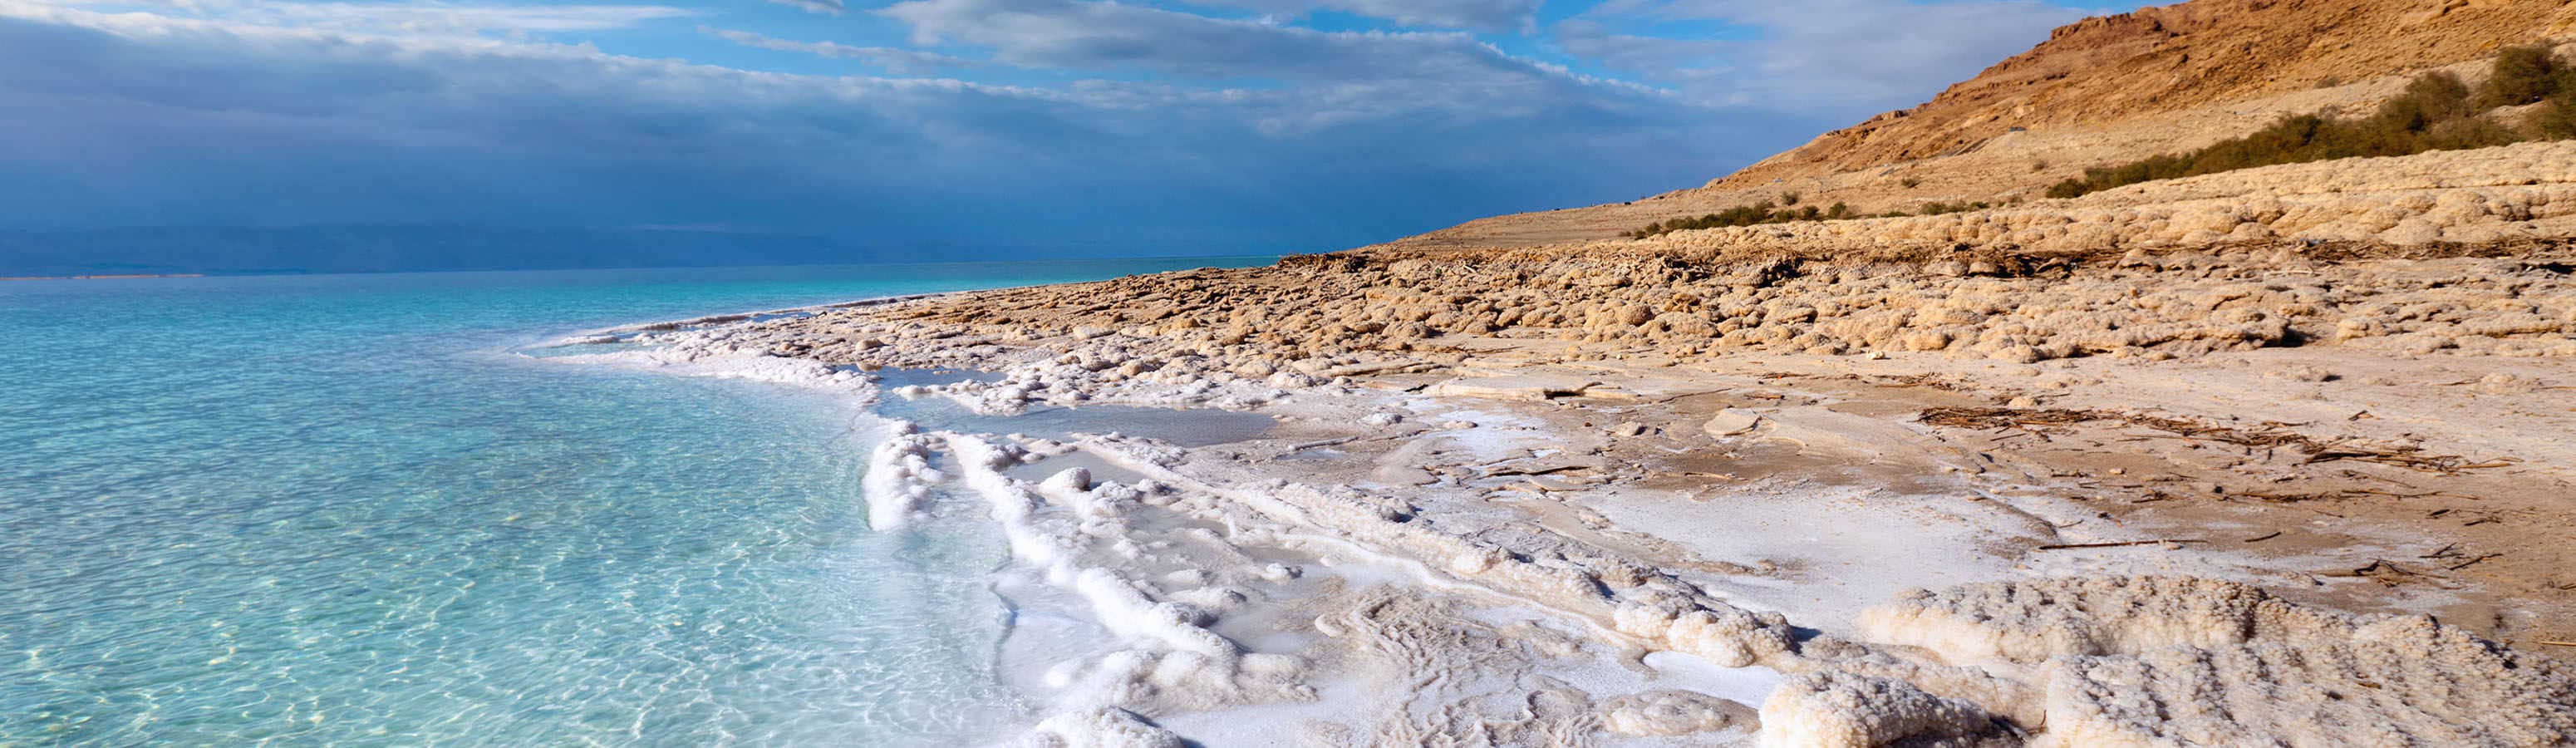 You can go to the Dead Sea all year round - you won't be bored